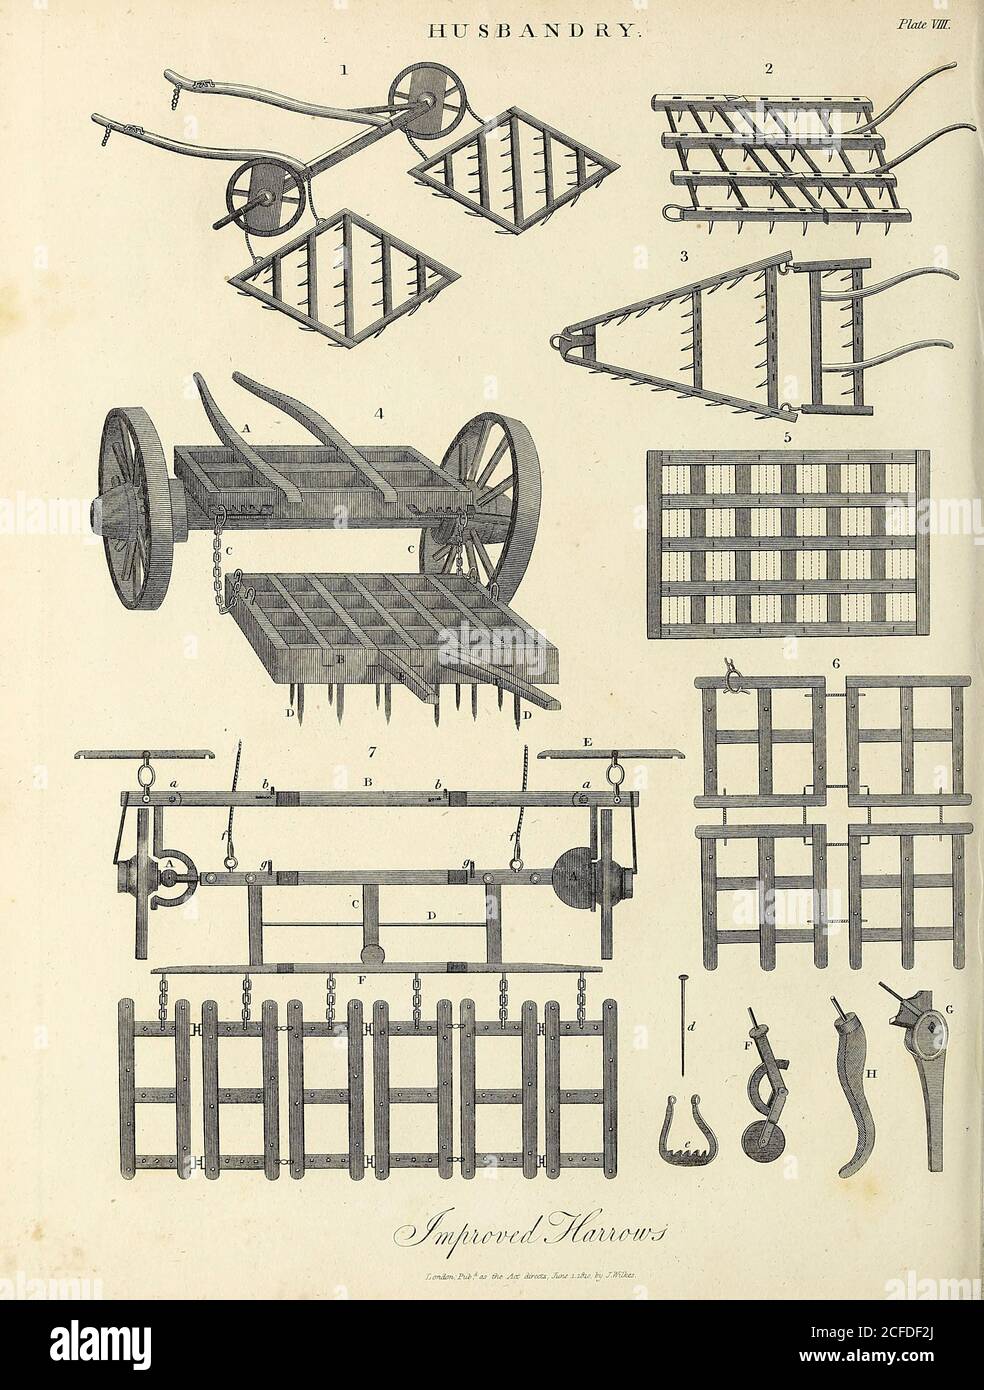 Husbandry Mechanical Farming Tools Copperplate engraving From the Encyclopaedia Londinensis or, Universal dictionary of arts, sciences, and literature; Volume X;  Edited by Wilkes, John. Published in London in 1811 Stock Photo